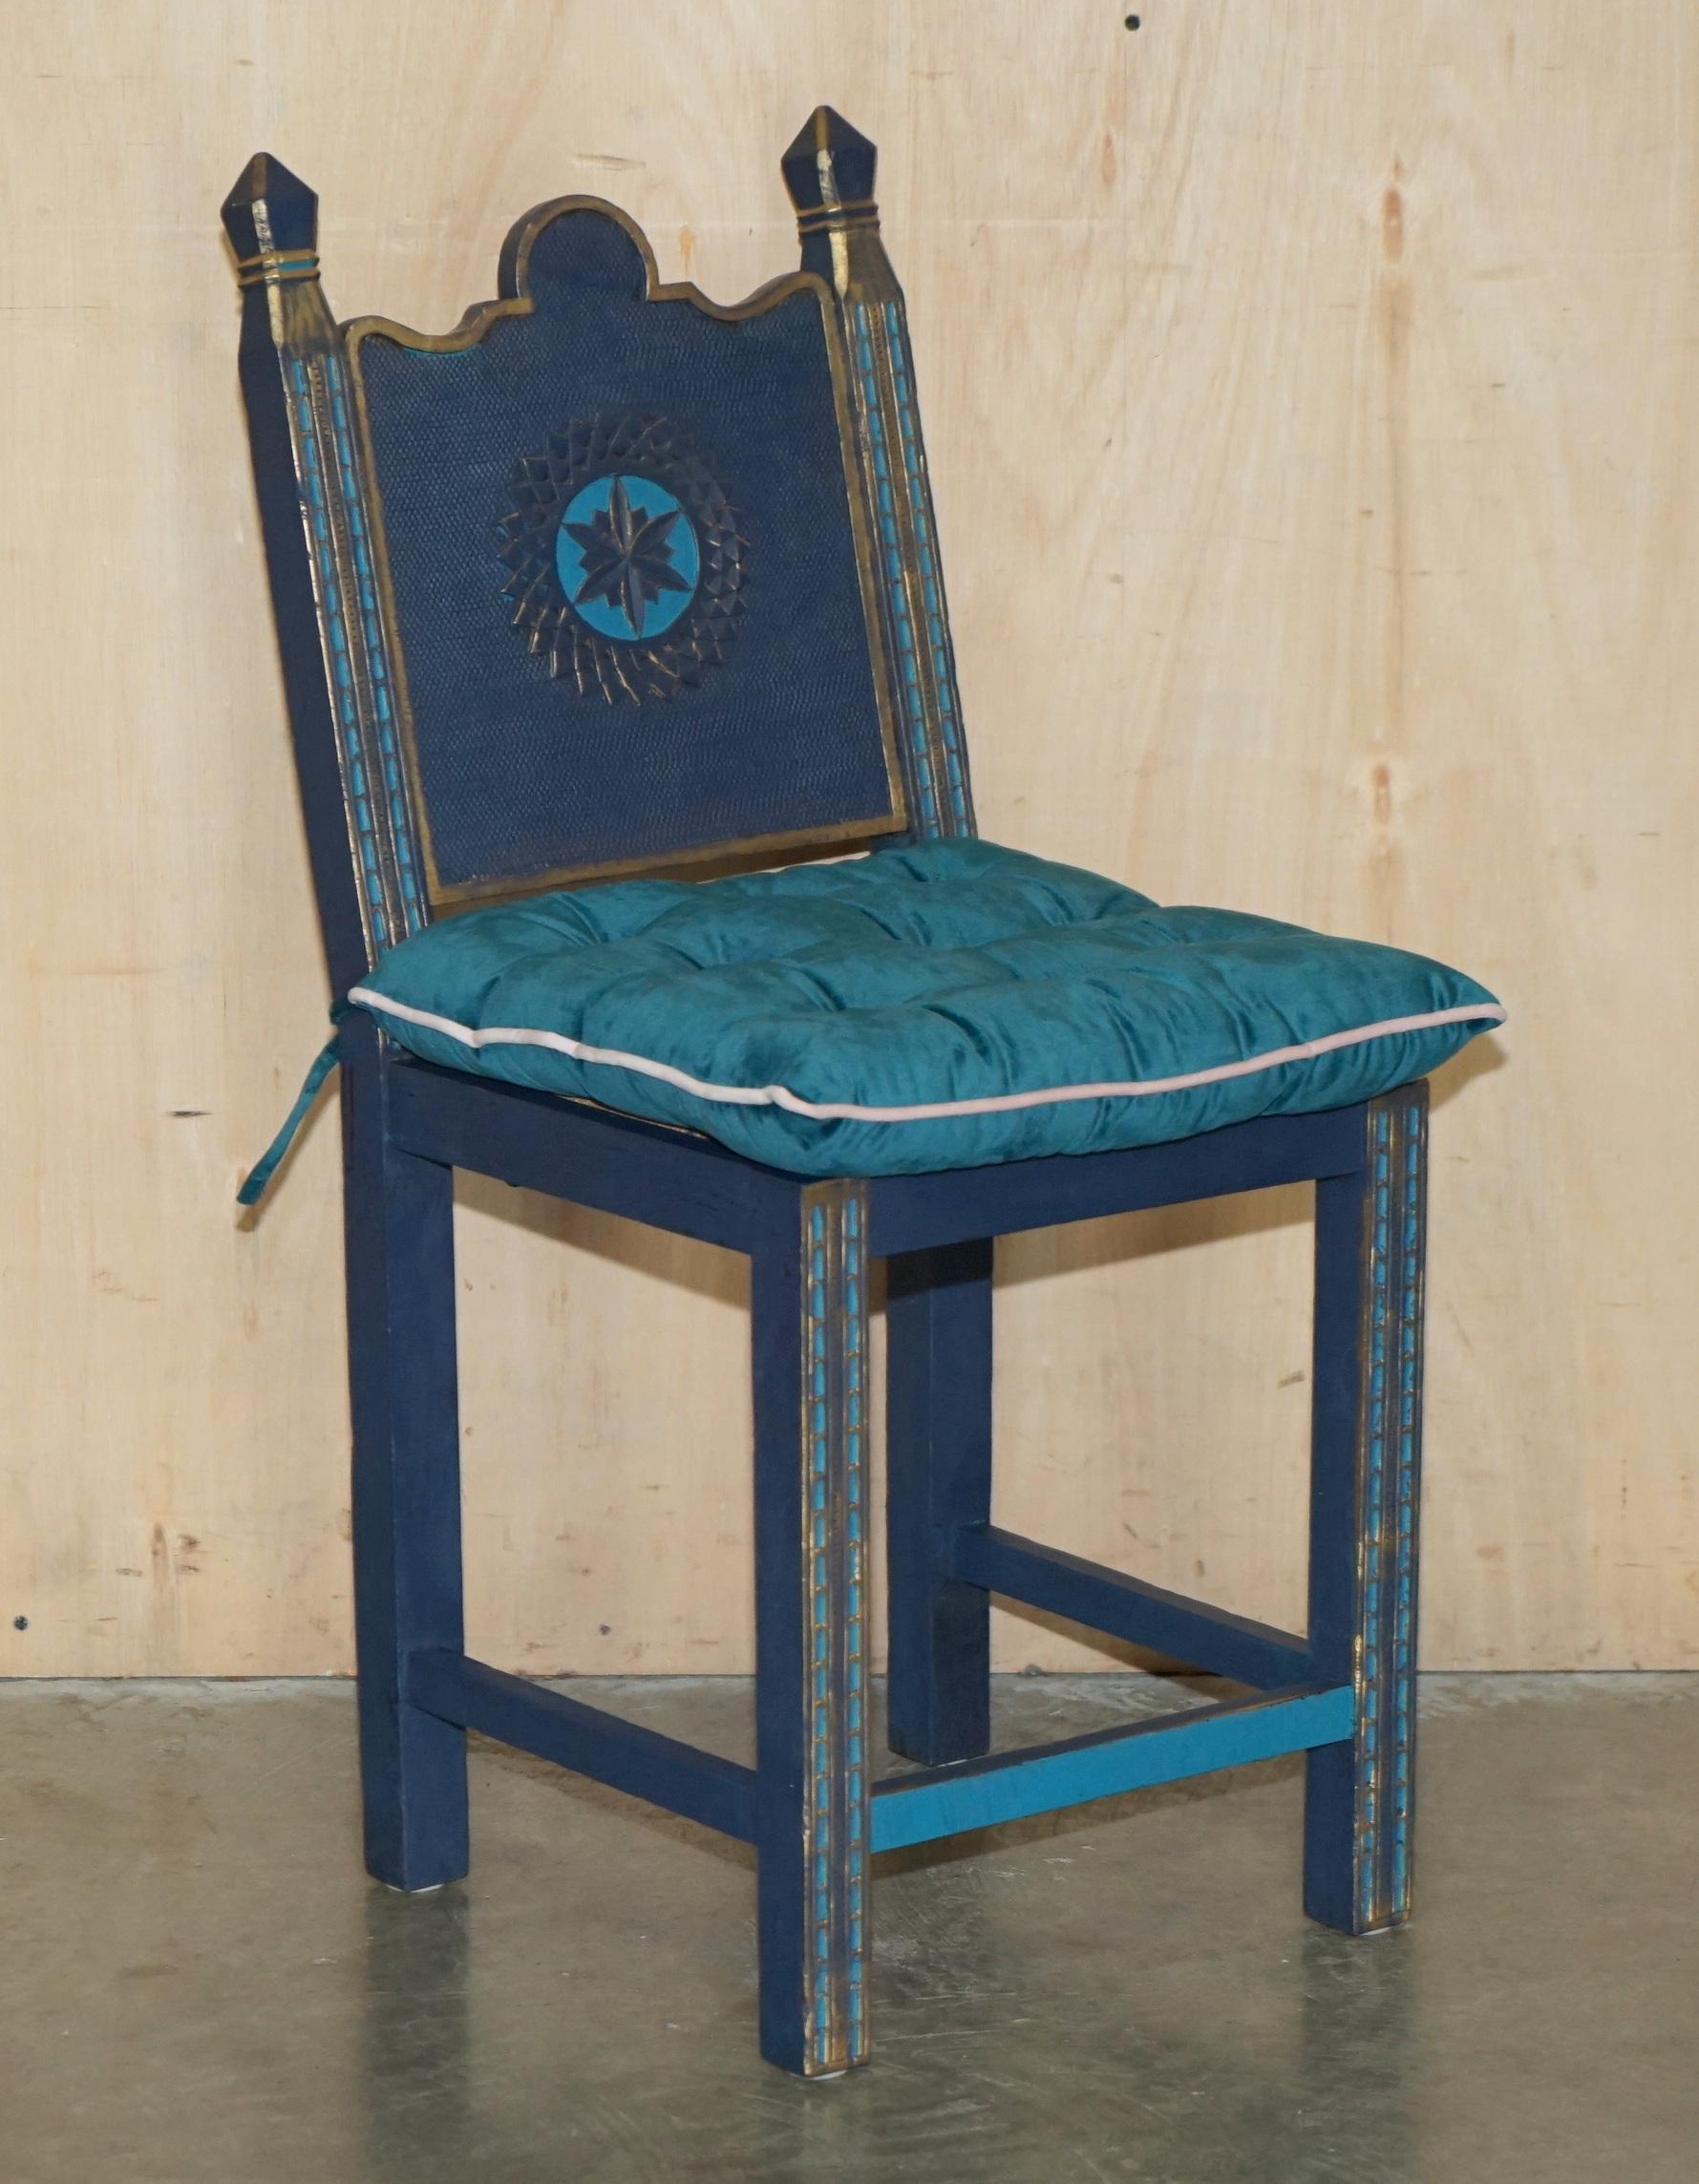 Royal House Antiques

Royal House Antiques is delighted to offer for sale this lovely suite of three vintage hand painted bergère Gothic Revival chairs with higher than normal seats and velvet cushions

Please note the delivery fee listed is just a